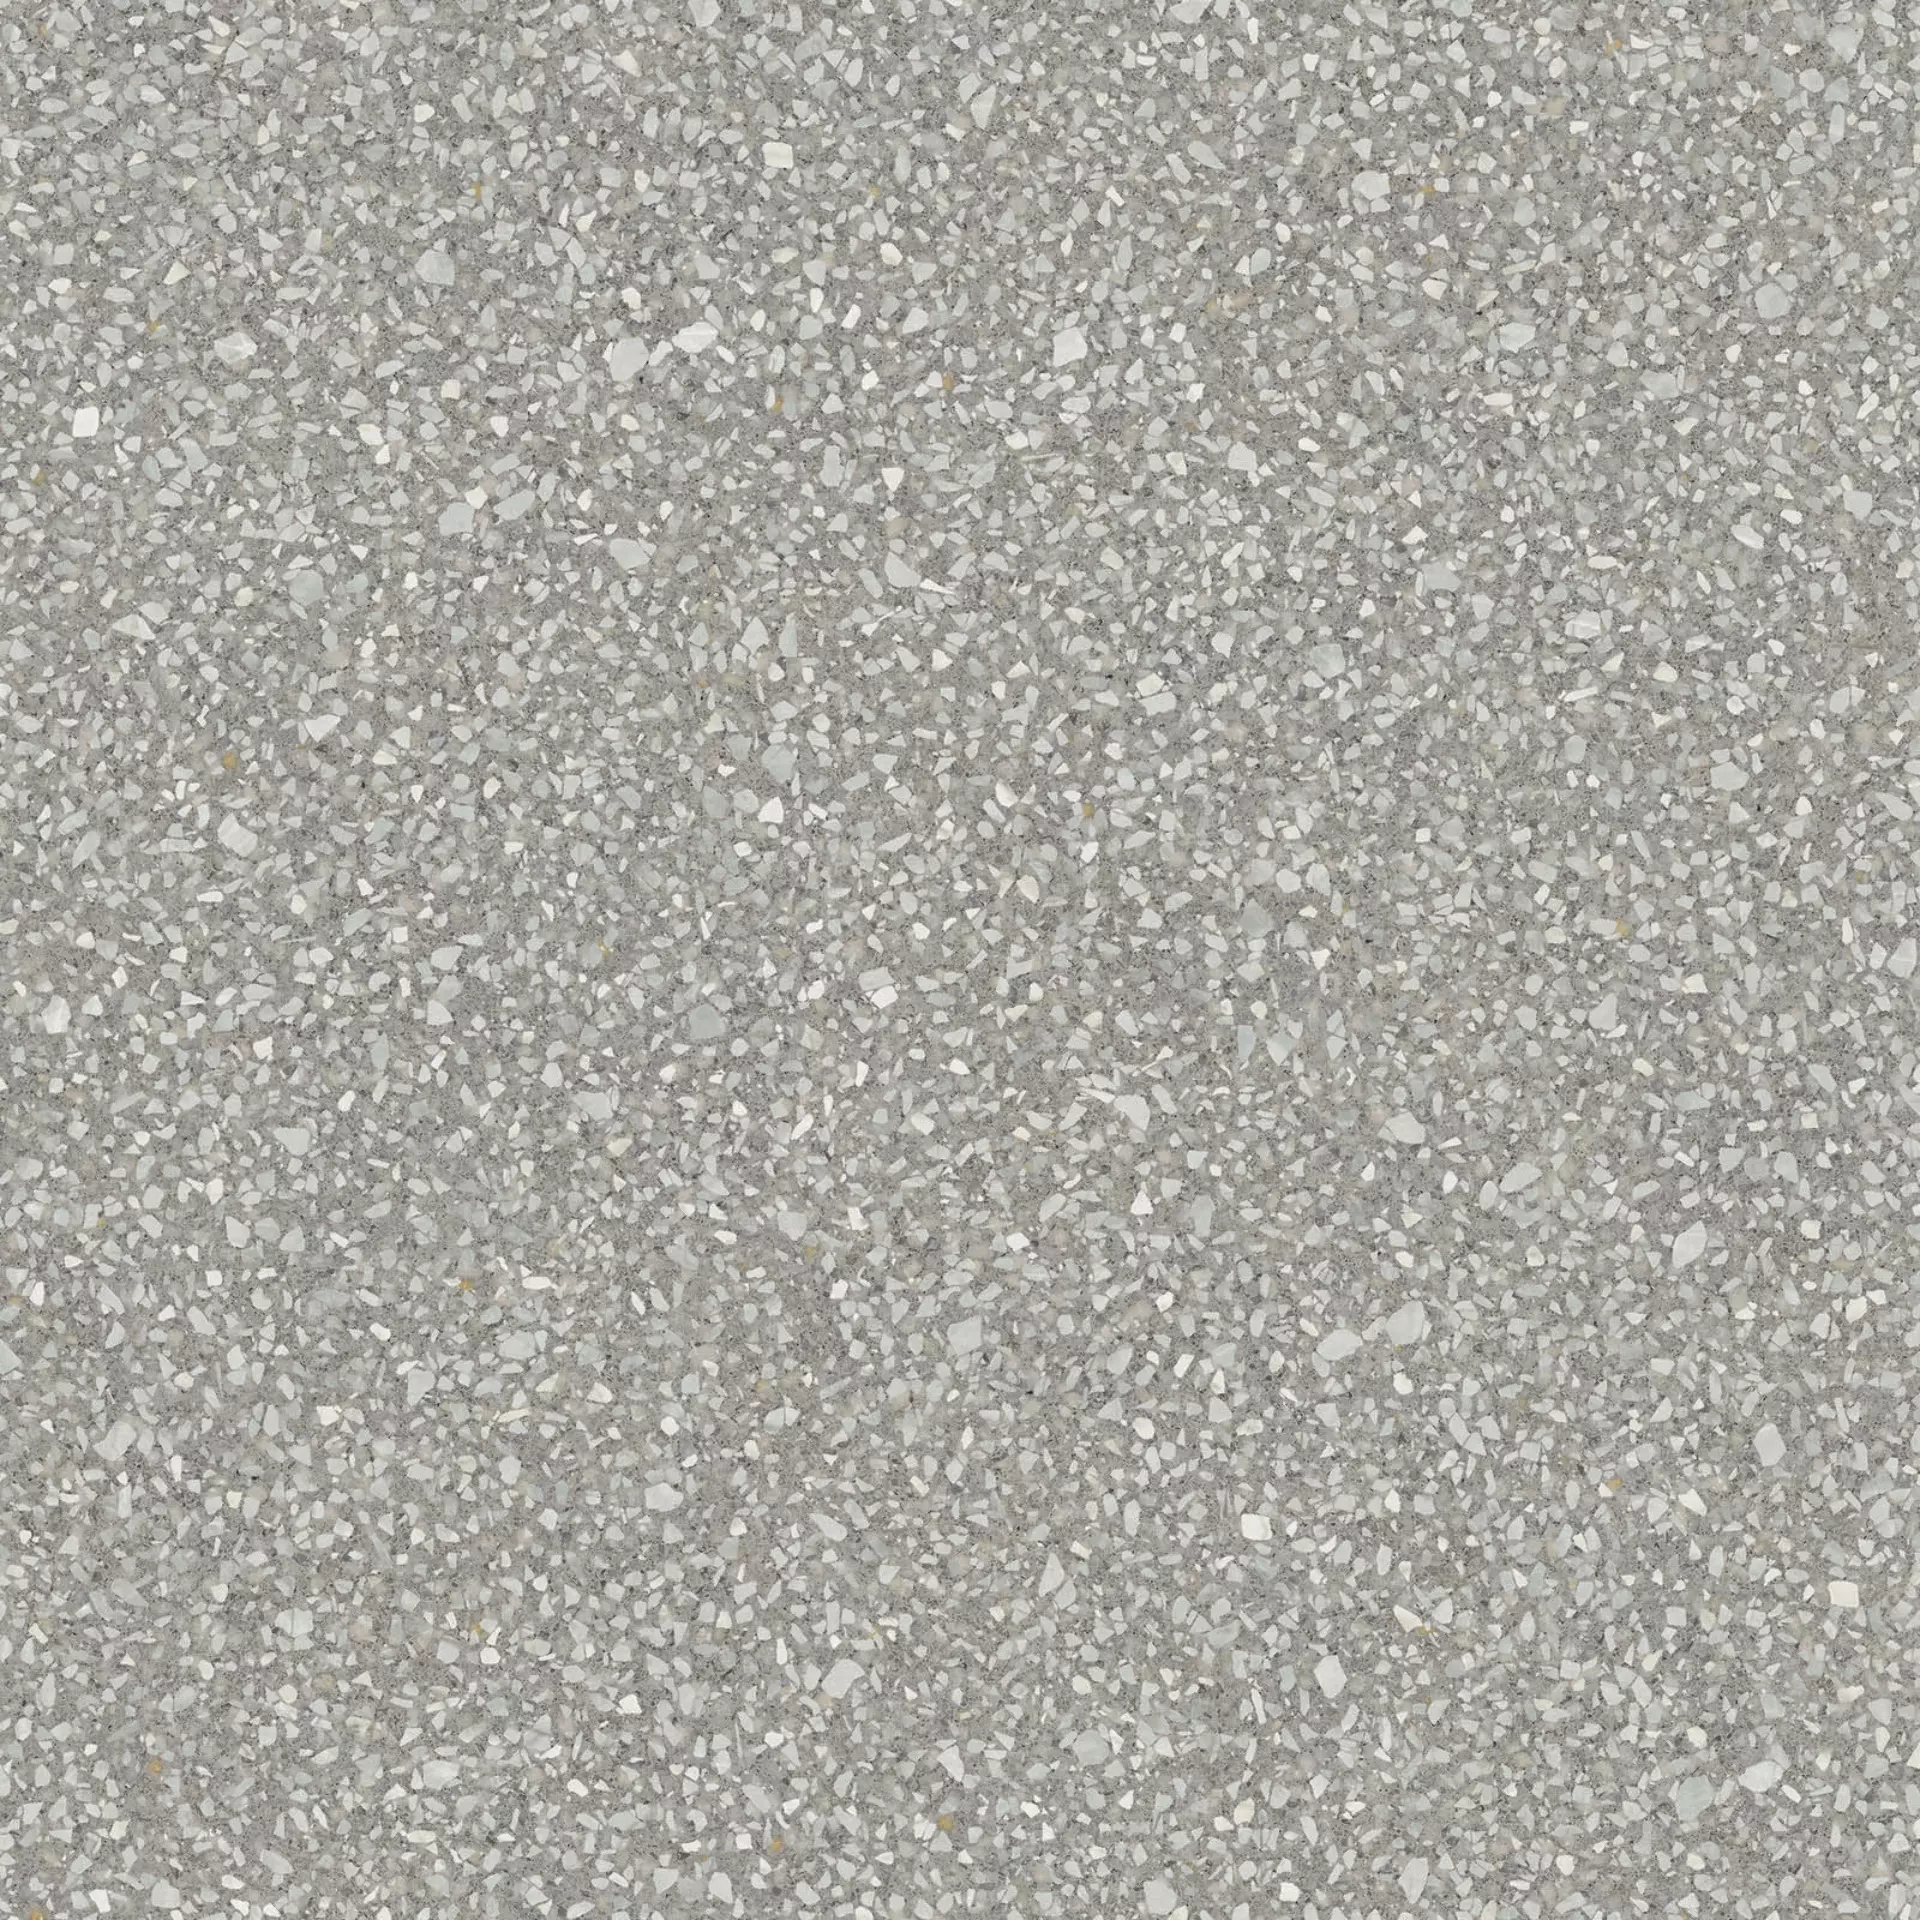 ABK Blend Dots Grey Naturale PF60006710 60x60cm rectified 8,5mm